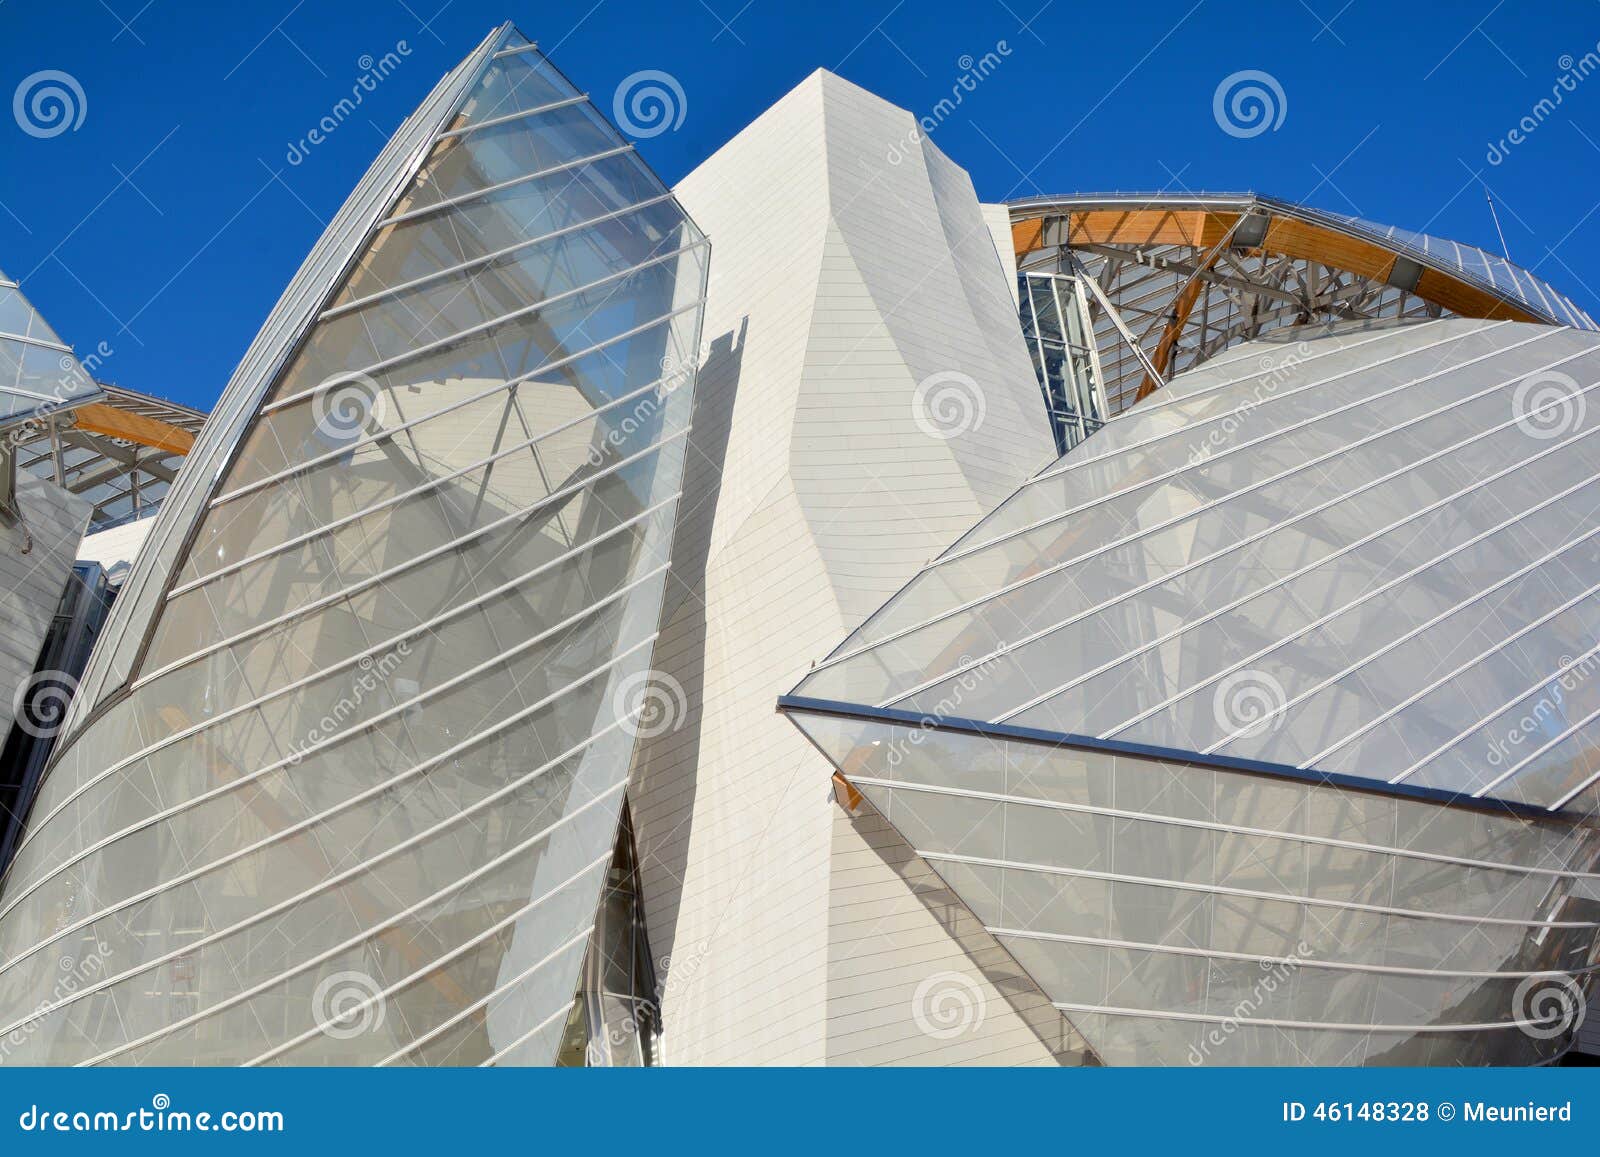 Louis Vuitton Foundation editorial stock photo. Image of building - 46148328